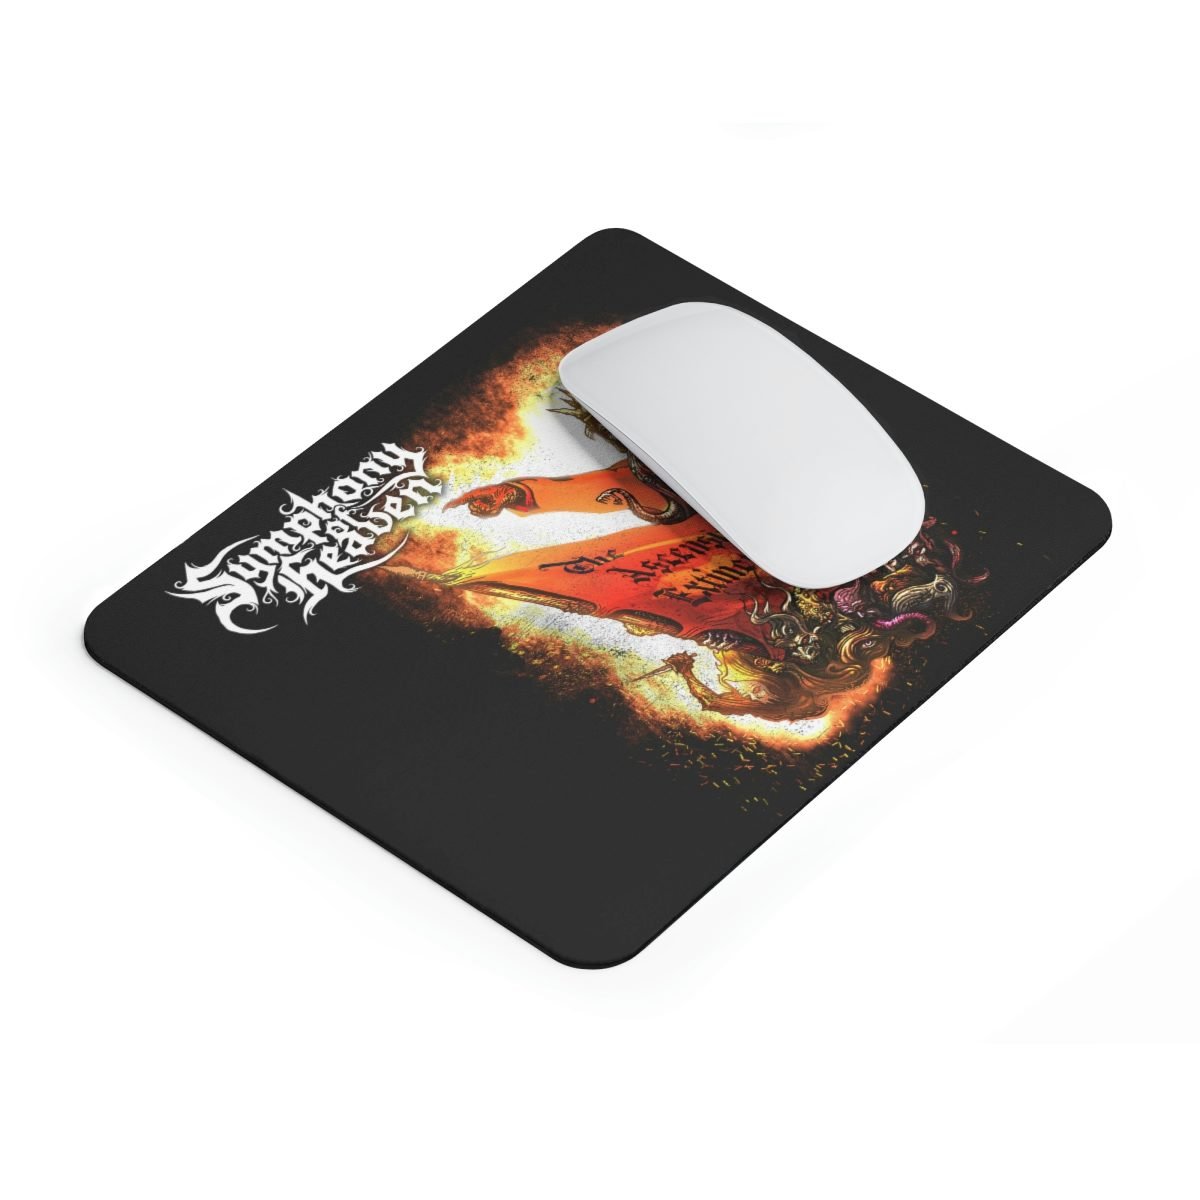 Symphony of Heaven – The Ascension of Extinction Mouse Pad